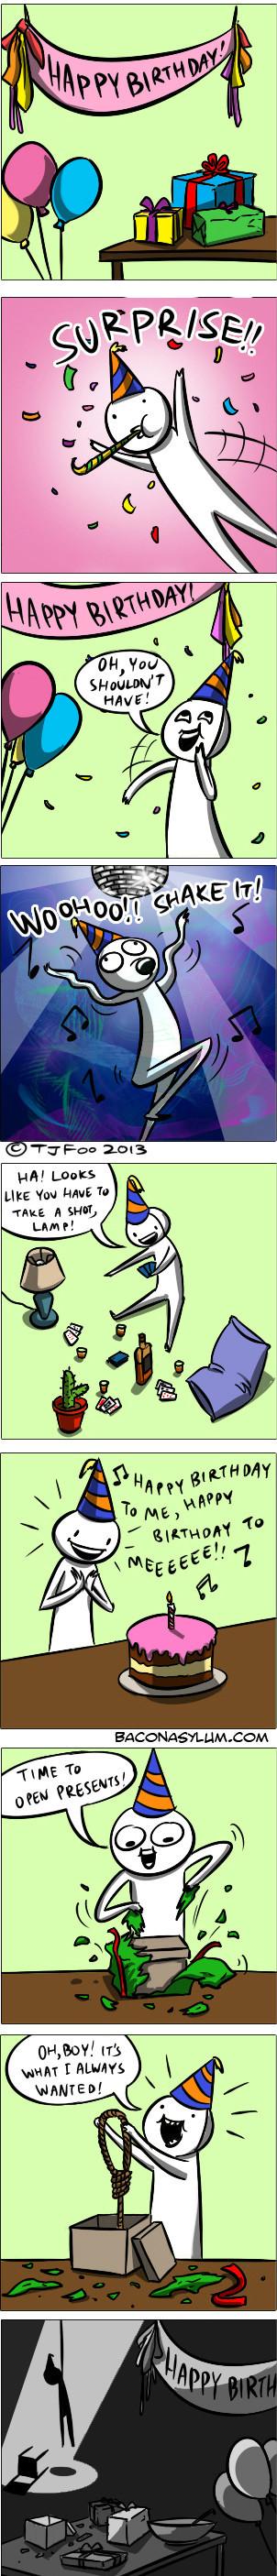 Dont-Know-If-Its-Okay-To-Laugh-Here,Laughing,Happy Birthday,suicide,happy birthday,happy ,birthday,comic,doodle,funny,happy birthday comic,alone,lonely,sad,saddist,birthday doodle